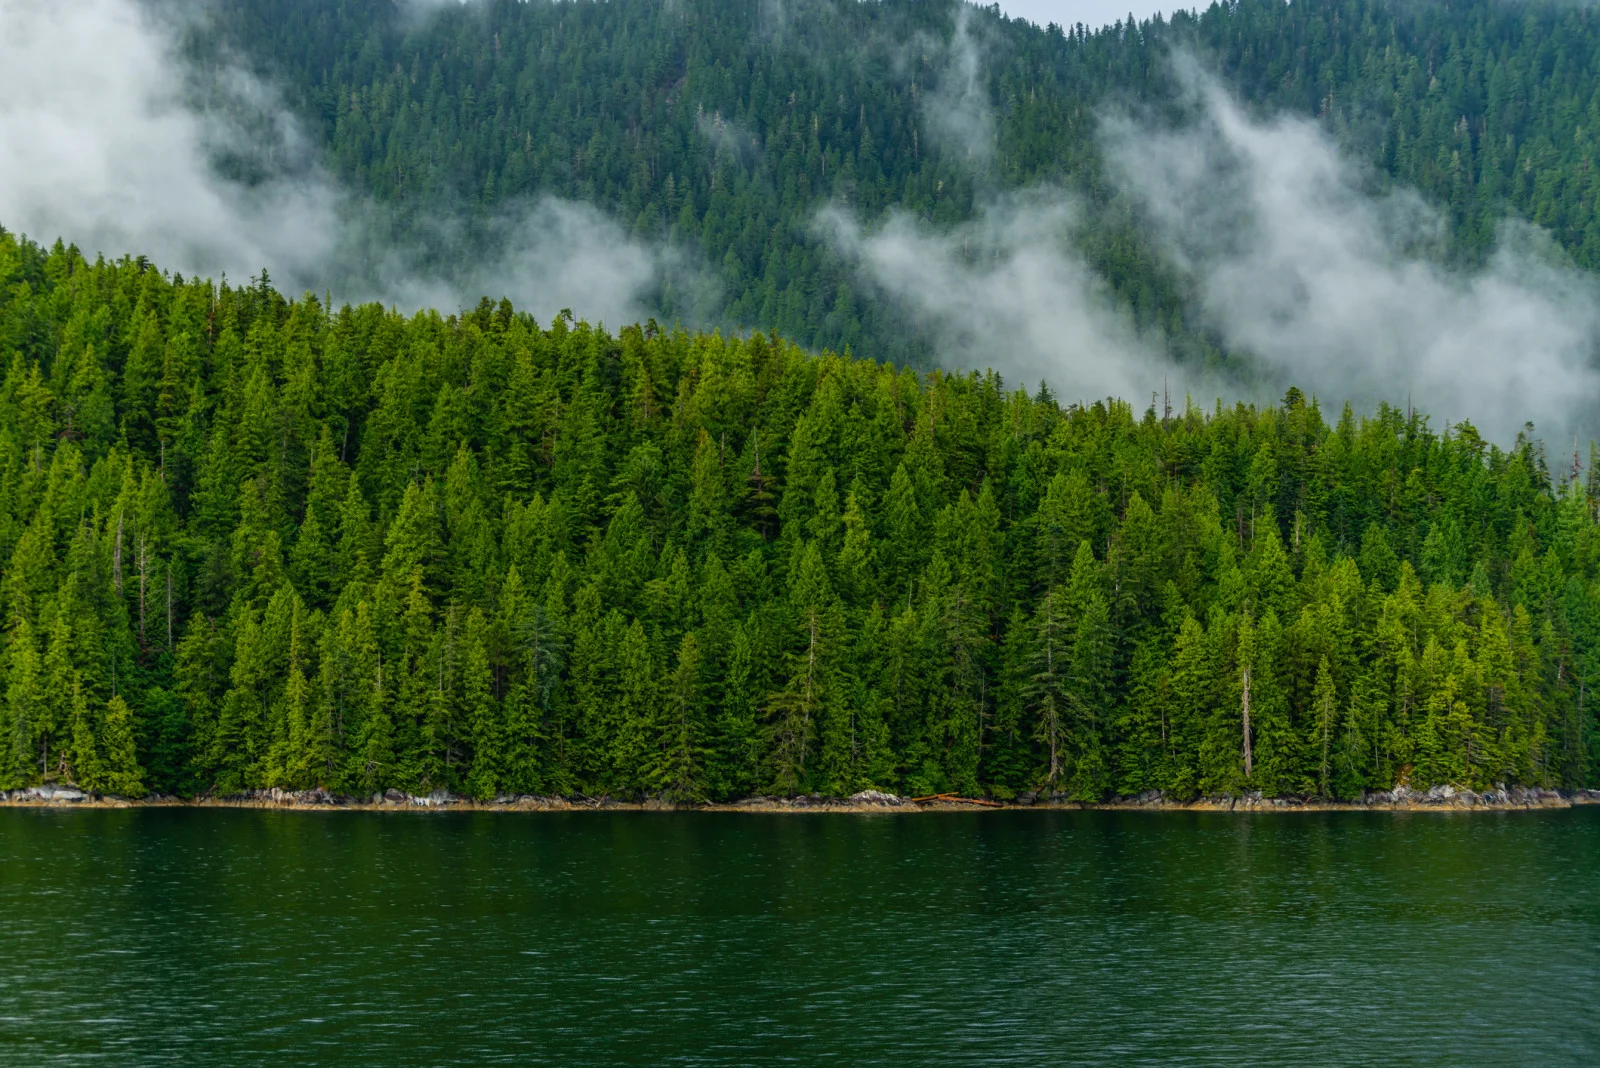 The Inside Passage in British Columbia. Many southern regions of B.C. have some of the highest reservoirs of carbon on the planet. (iStock / Getty Images Plus)